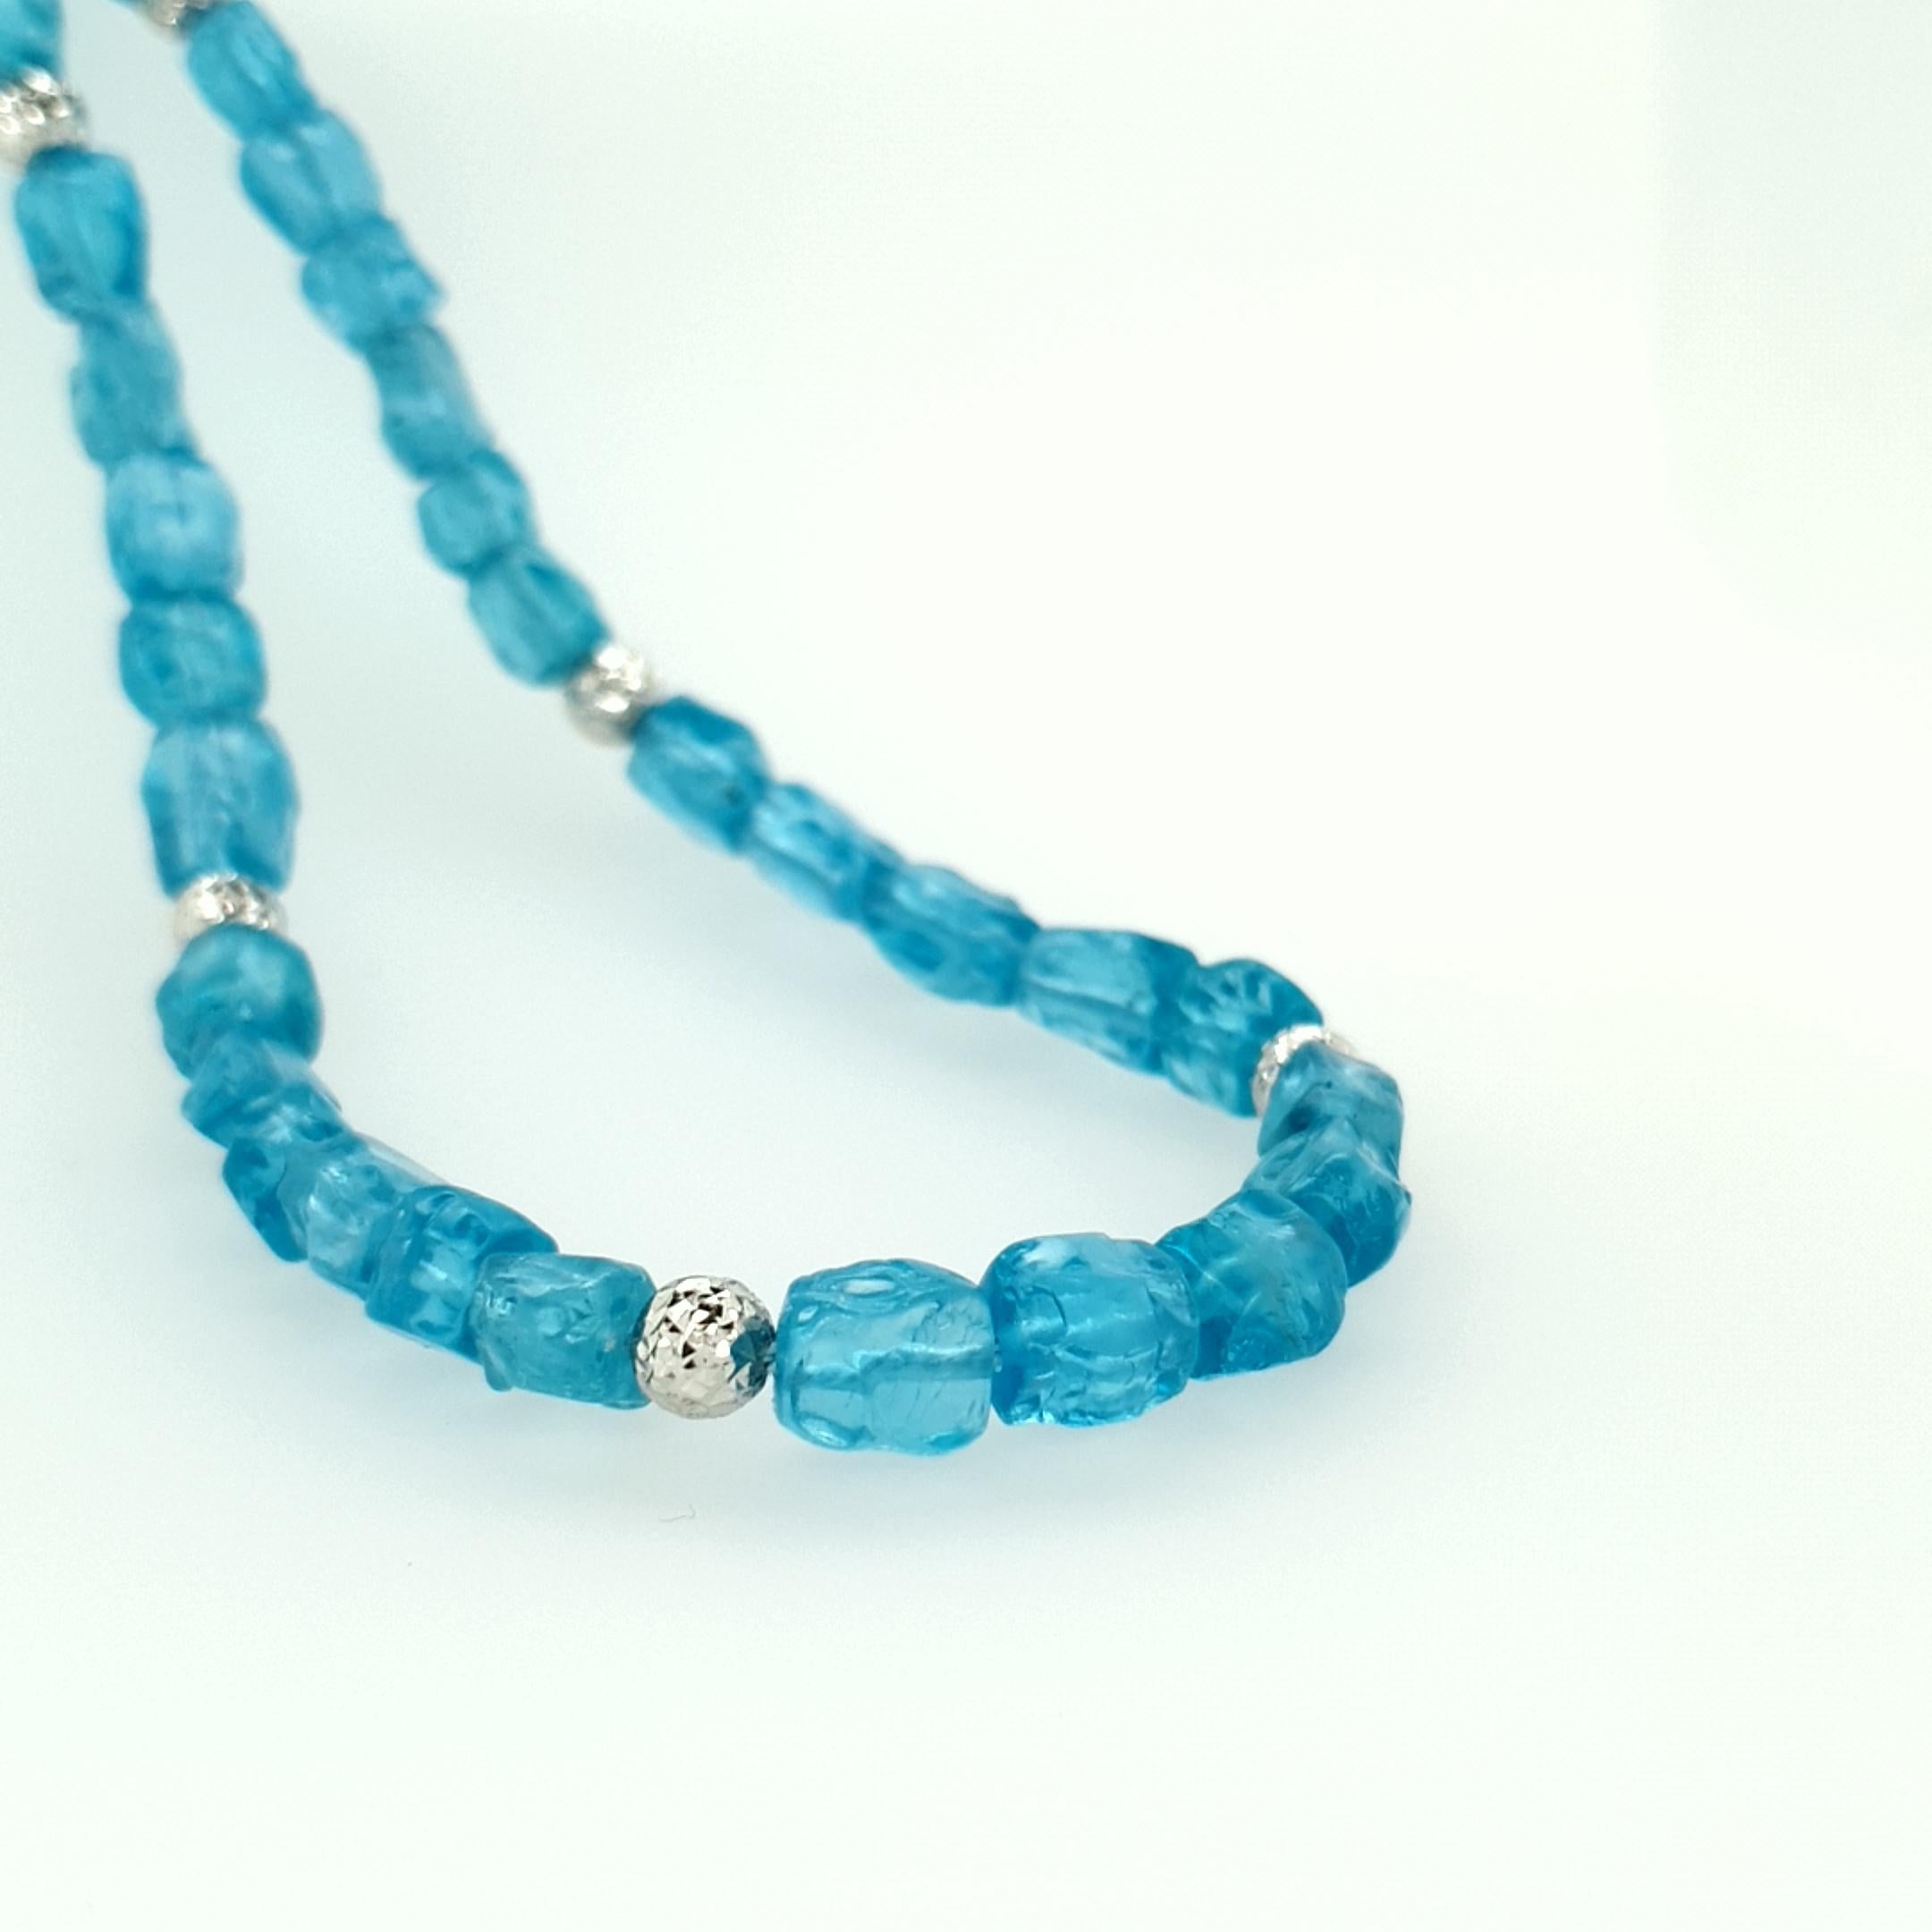 This Natural Paraiba Blue Apatite Nugget Beaded Necklace with 18 Carat White Gold is totally handmade in German quality. The screw clasp is easy to handle and very secure.
Modern and contemperary design combined with a fanatstic colour of Apatite